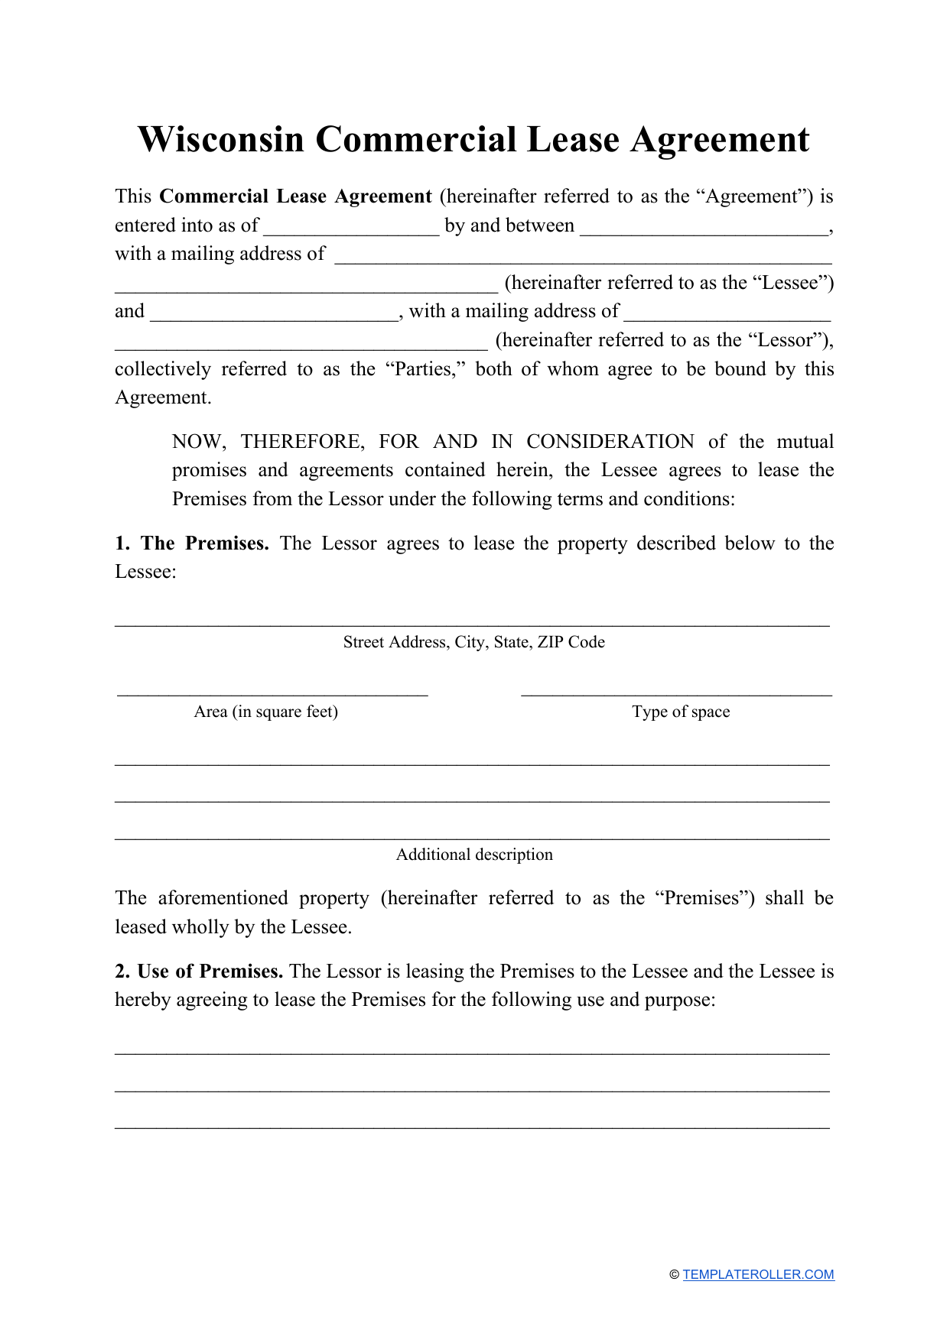 Commercial Lease Agreement Template - Wisconsin, Page 1